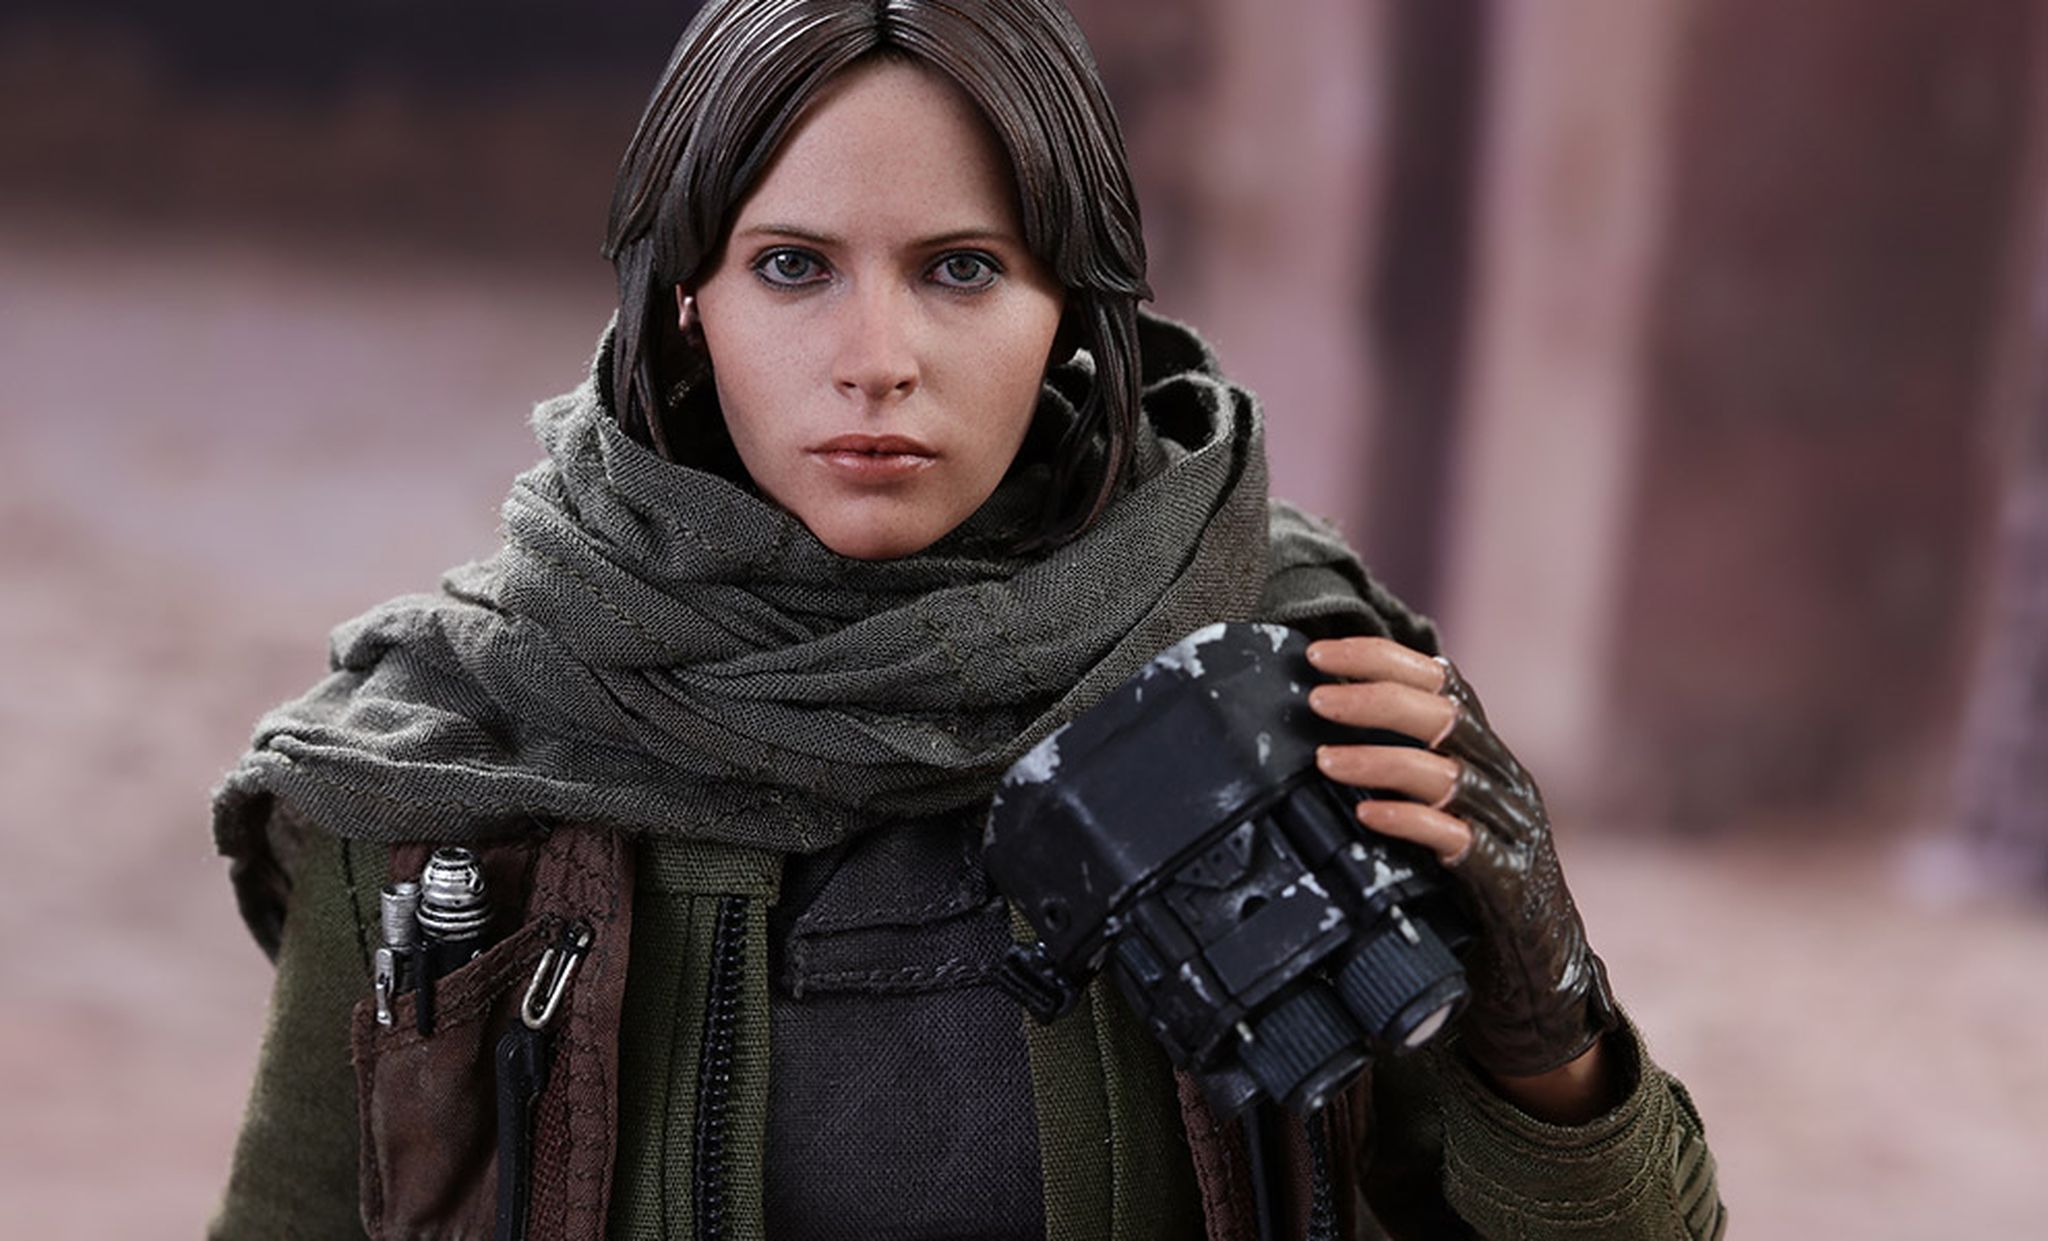 Star Wars Rogue One. Jyn Erso. Hot Toys Deluxe